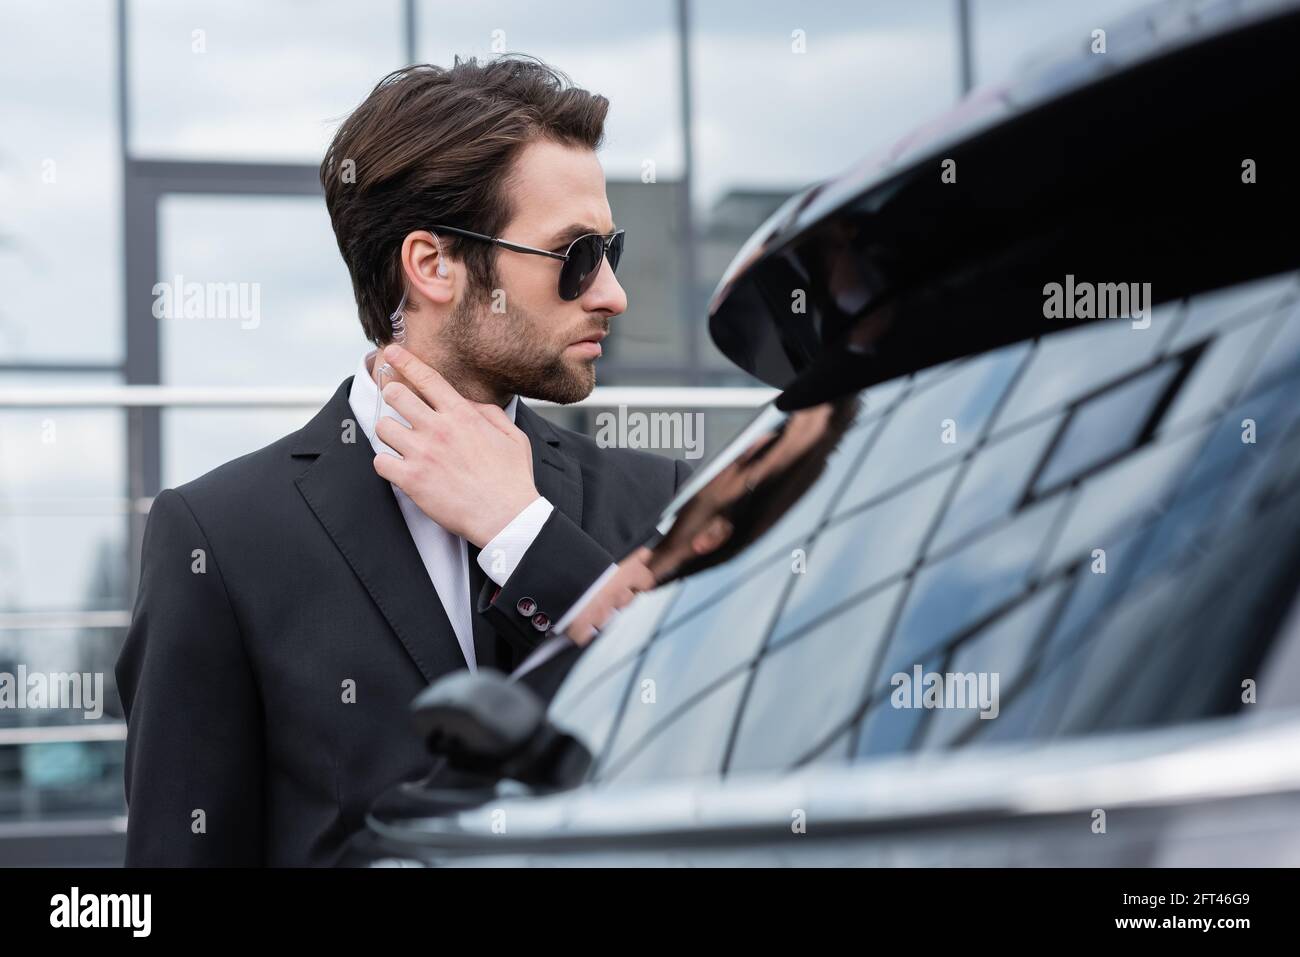 https://c8.alamy.com/comp/2FT46G9/bearded-bodyguard-in-suit-and-sunglasses-adjusting-security-earpiece-near-blurred-car-2FT46G9.jpg